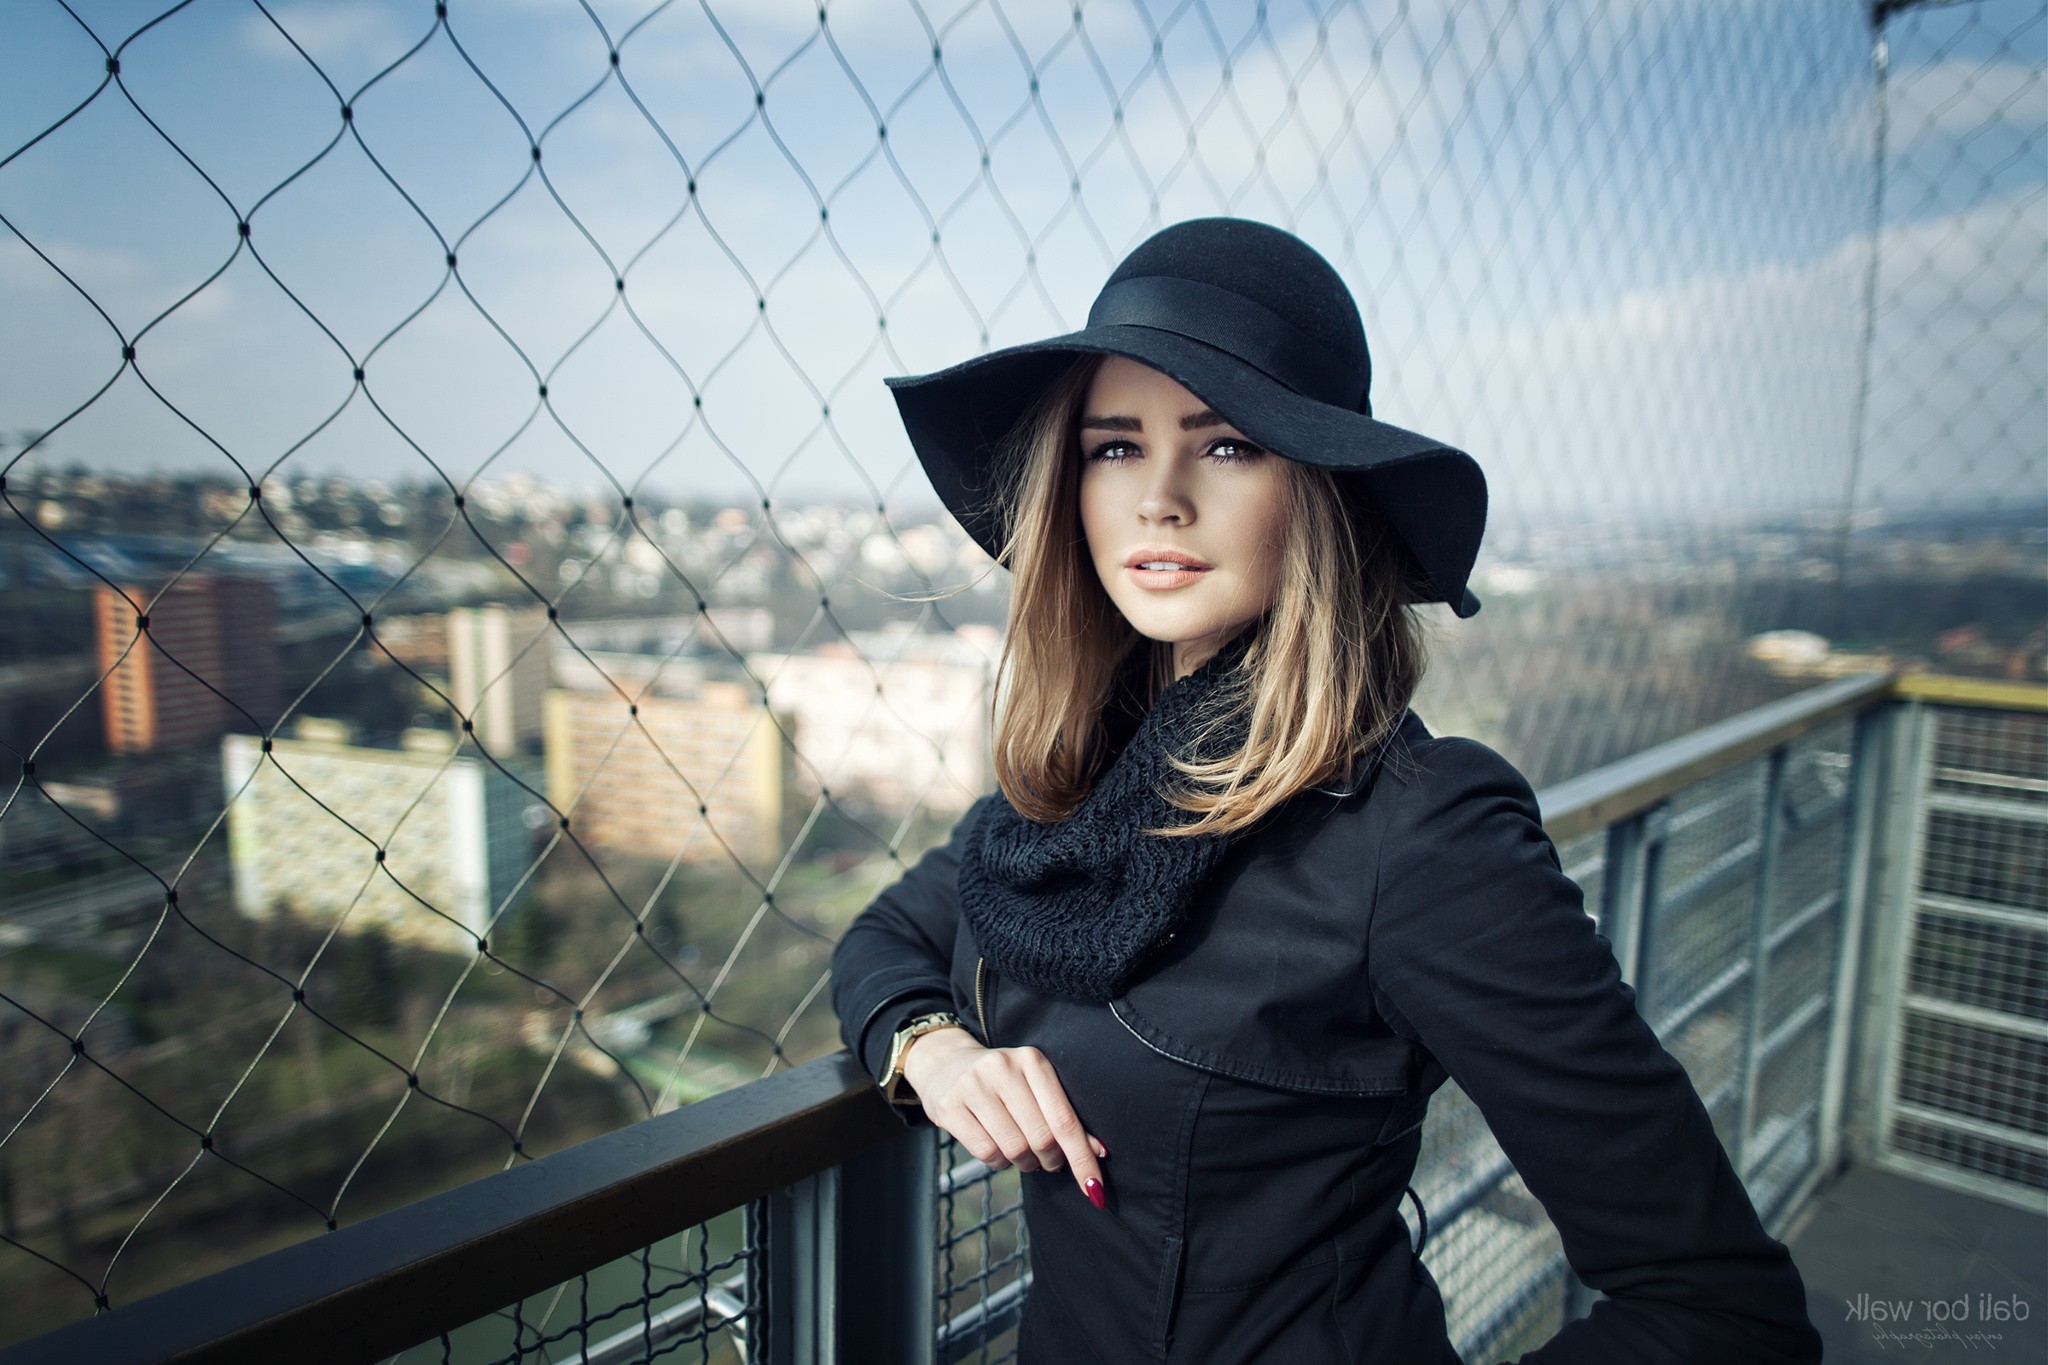 women, Blonde, Face, Women Outdoors, Brown Eyes, Portrait, Black Clothing, Hat, Red Nails, Rooftops, Depth Of Field Wallpaper